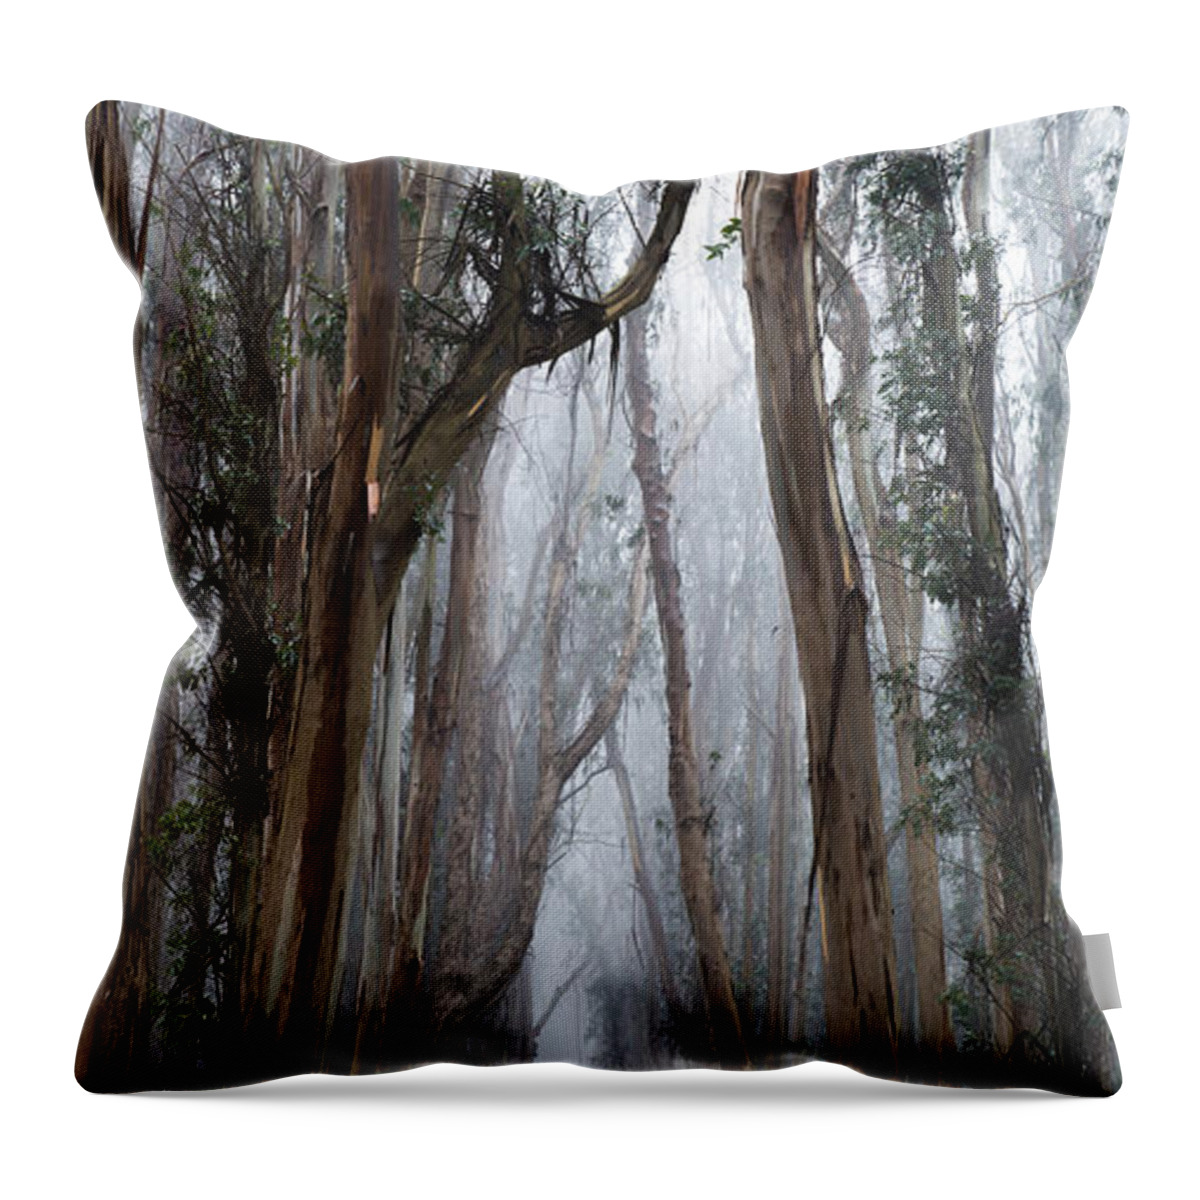 California Throw Pillow featuring the photograph Twisted Path by Dustin LeFevre